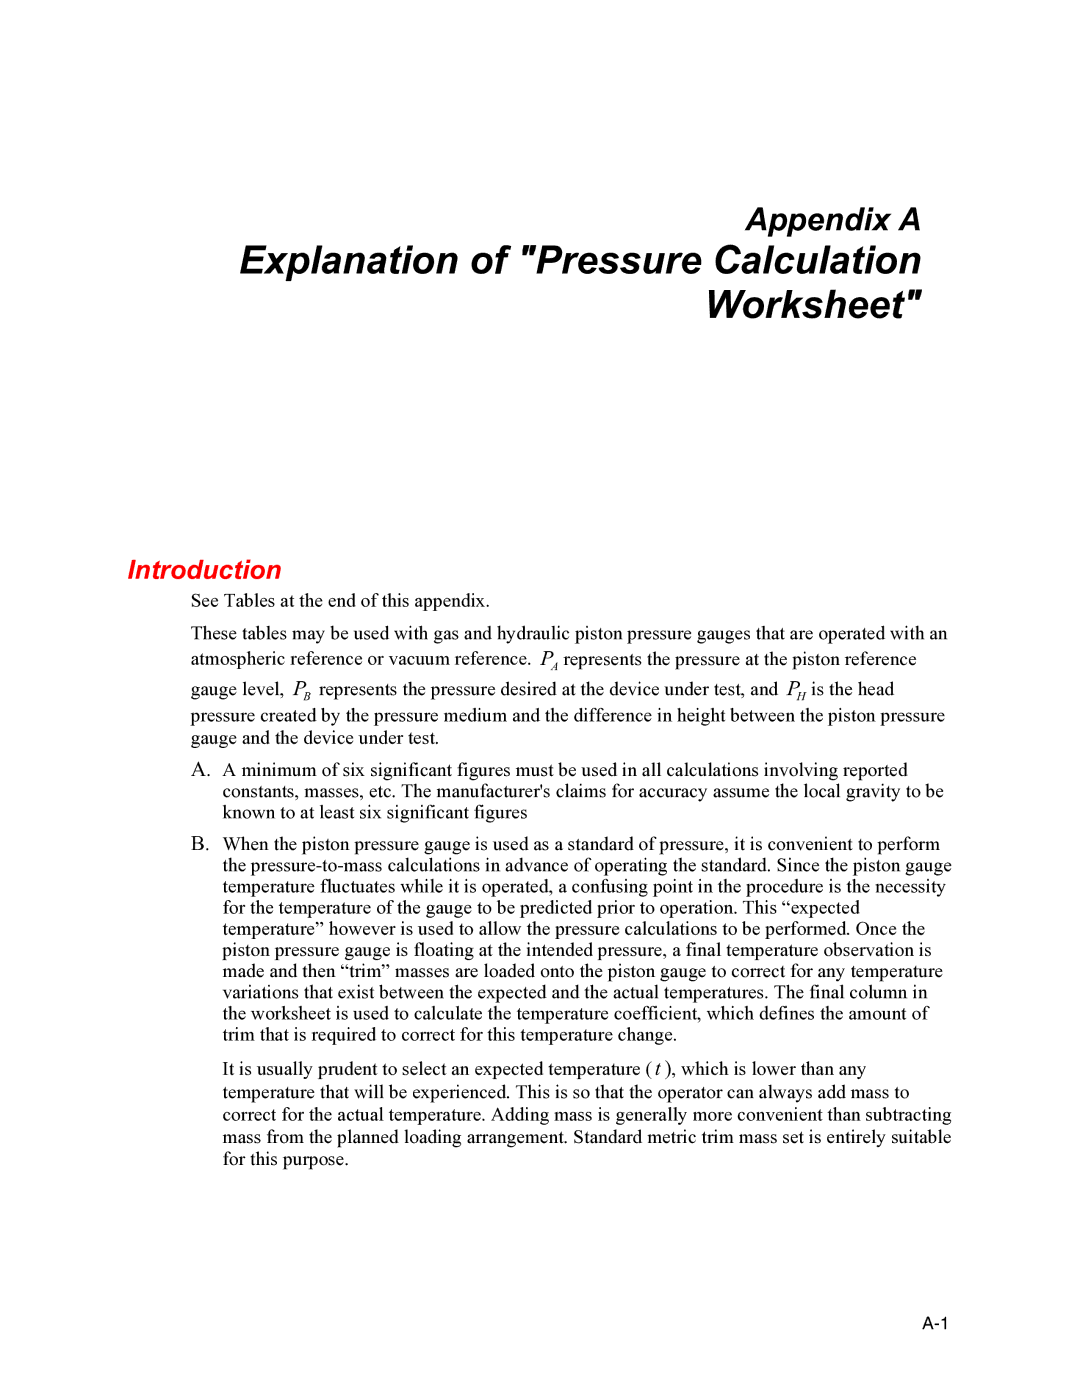 Fluke 2470 specifications Explanation of Pressure Calculation Worksheet, Introduction 